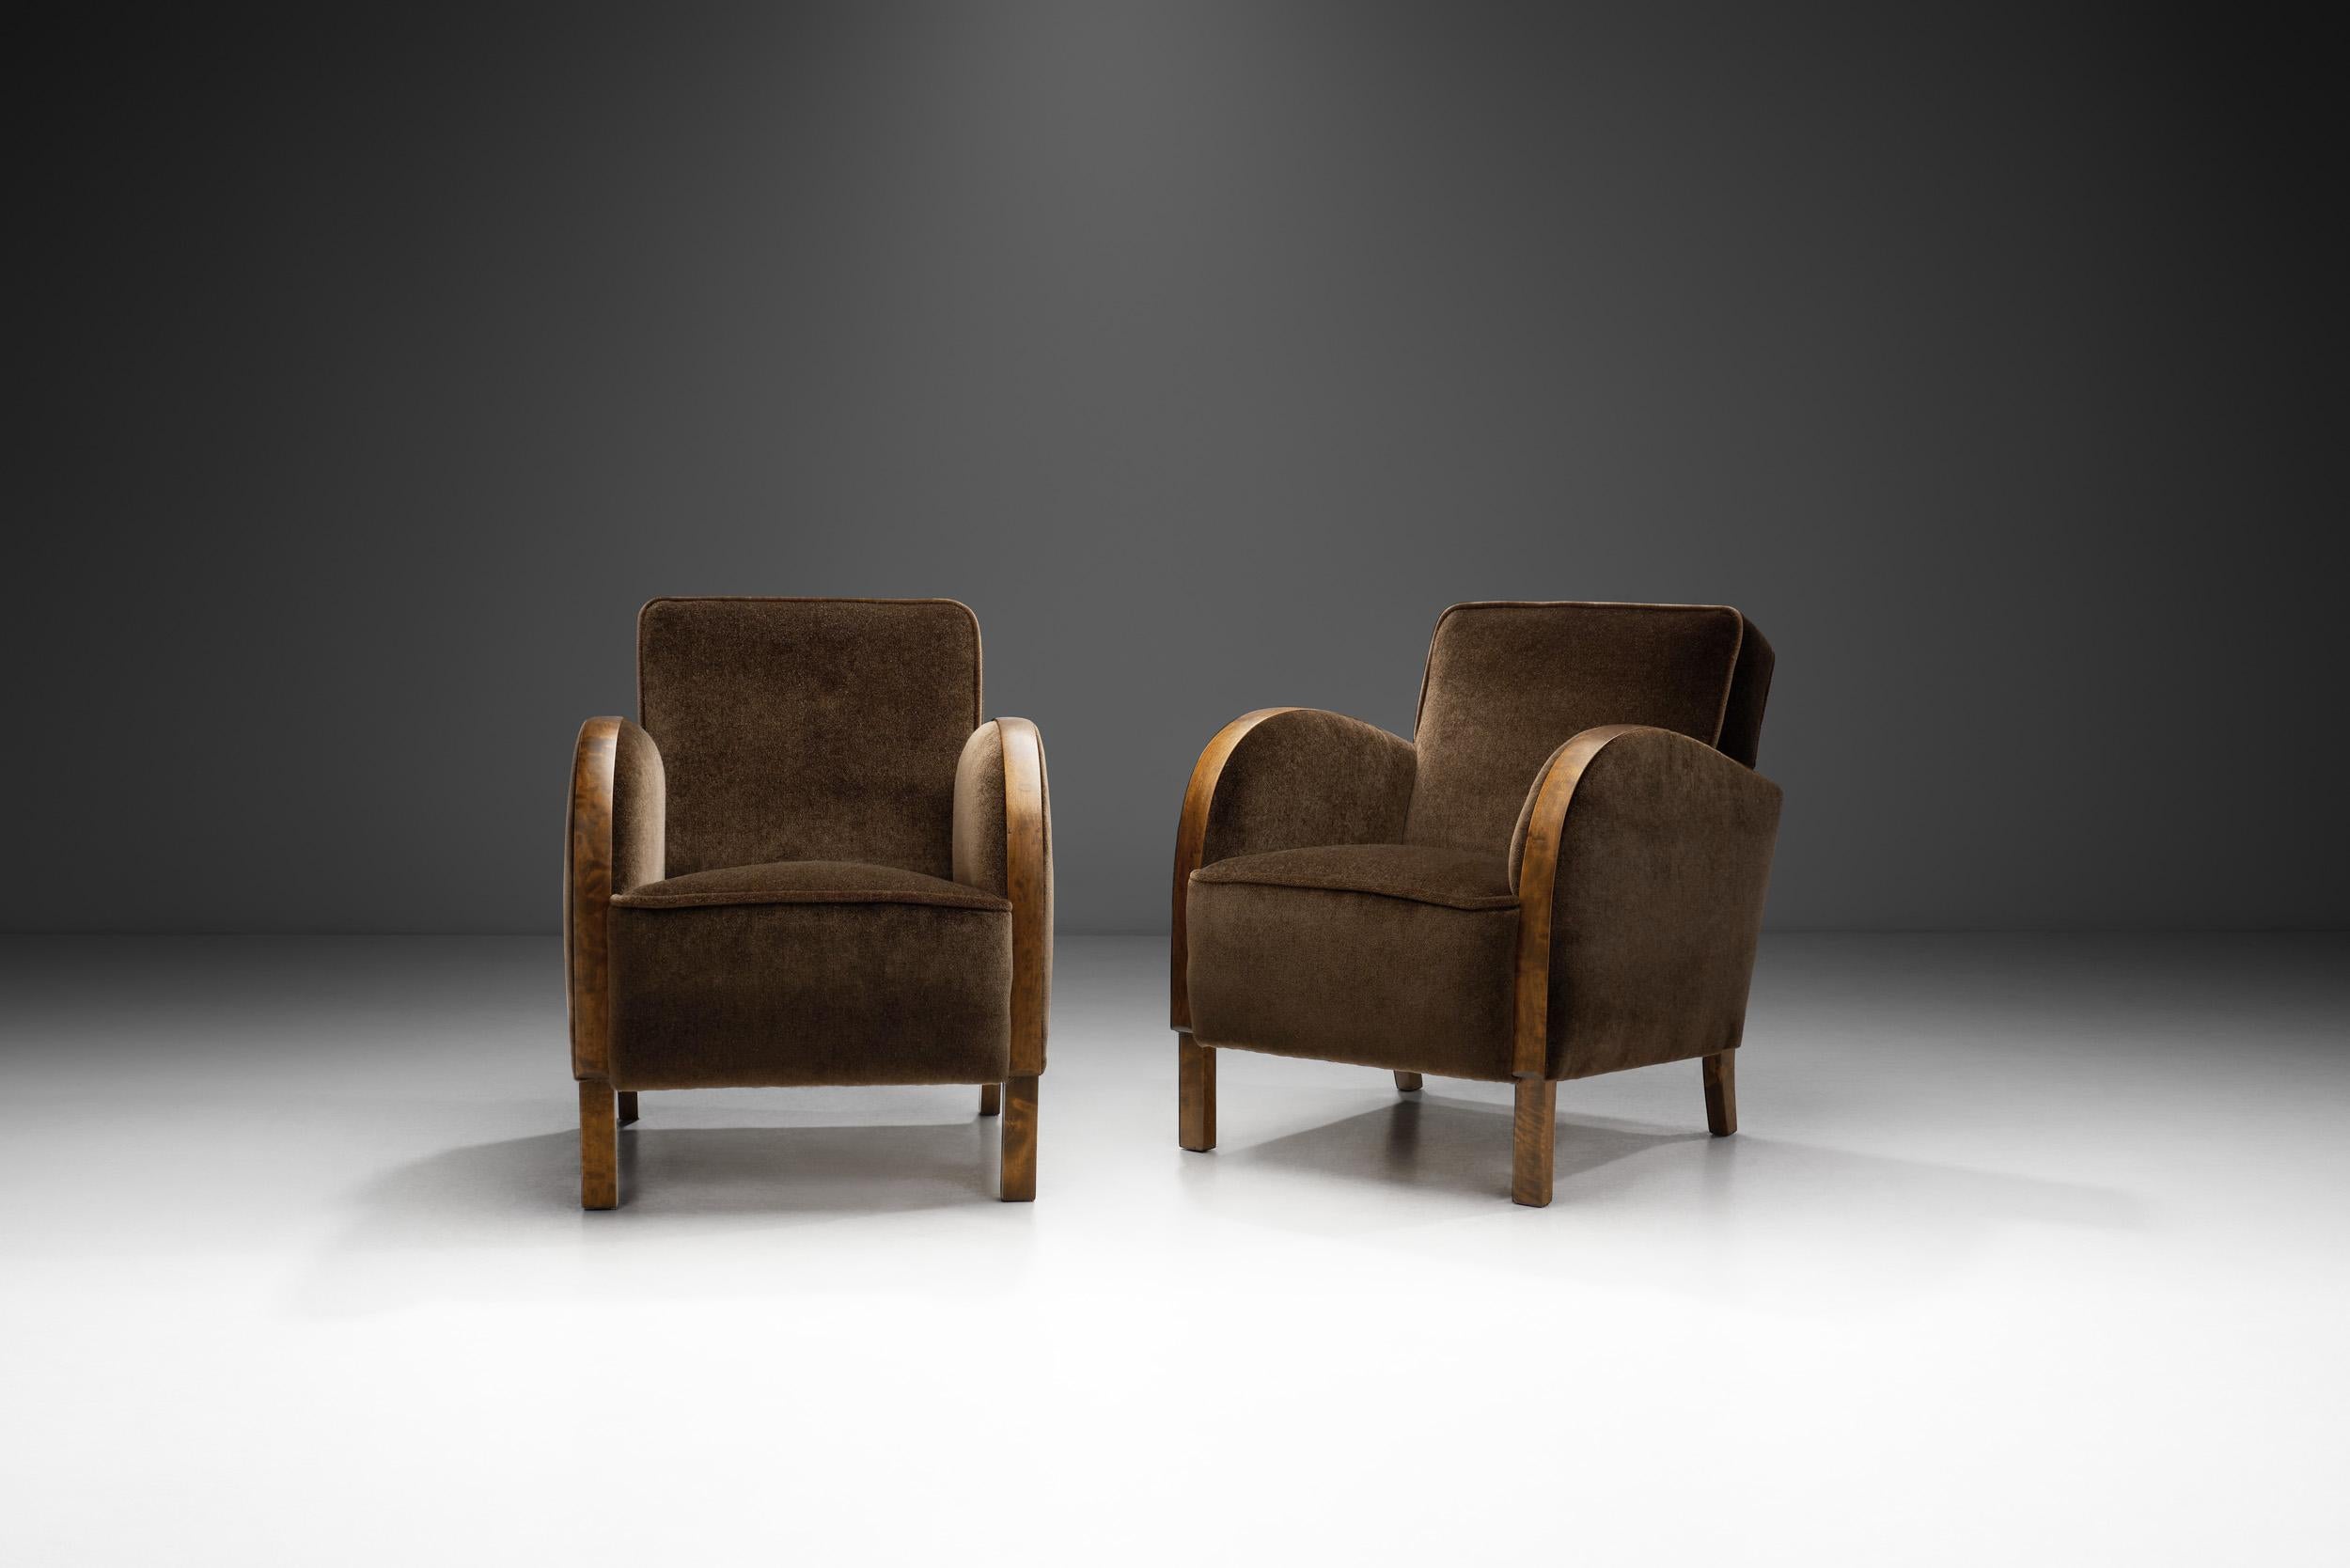 European Stained Birch Art Deco Armchairs, Europe ca 1930s